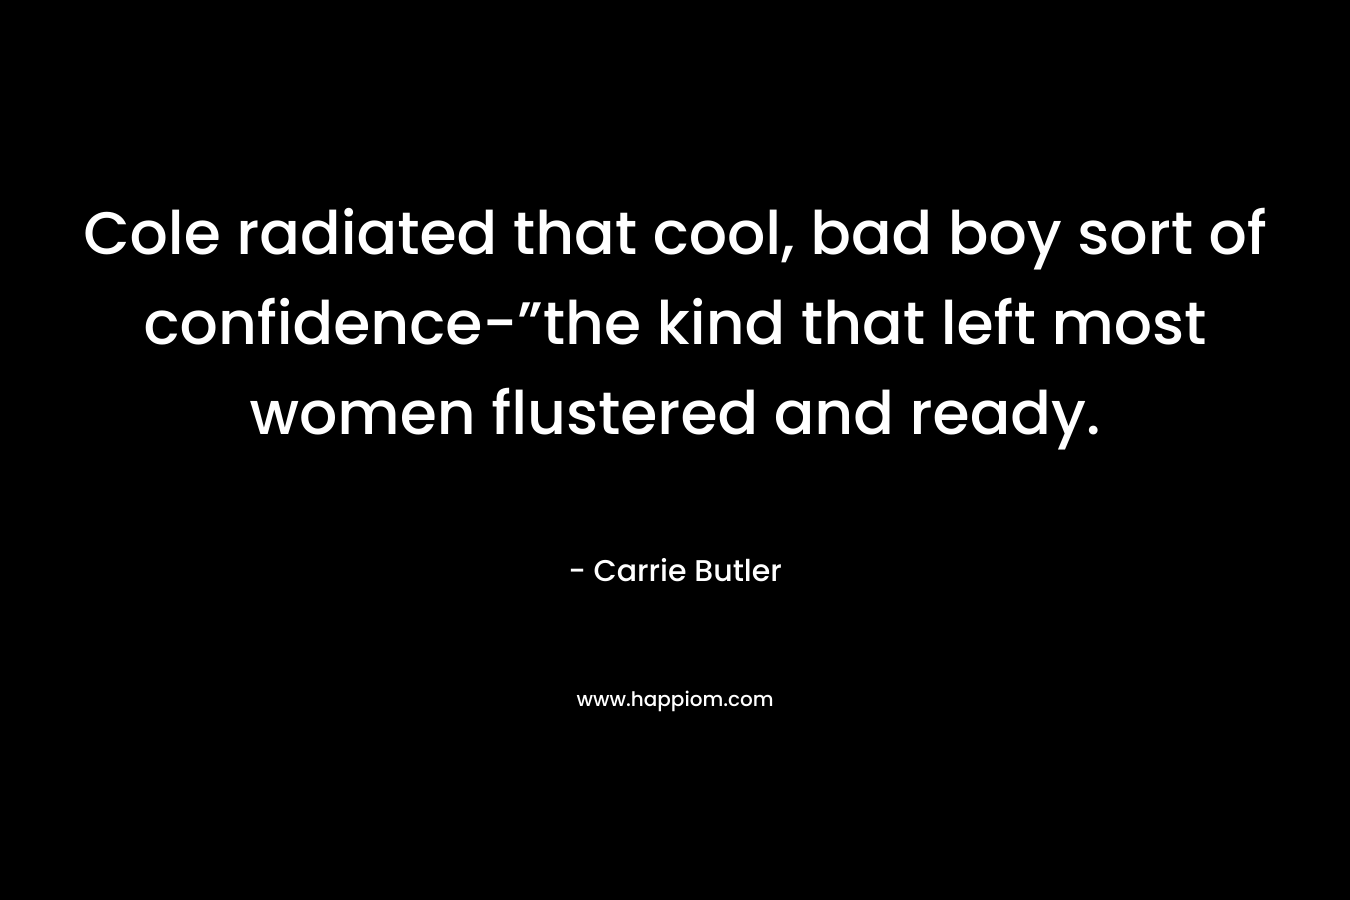 Cole radiated that cool, bad boy sort of confidence-”the kind that left most women flustered and ready. – Carrie Butler